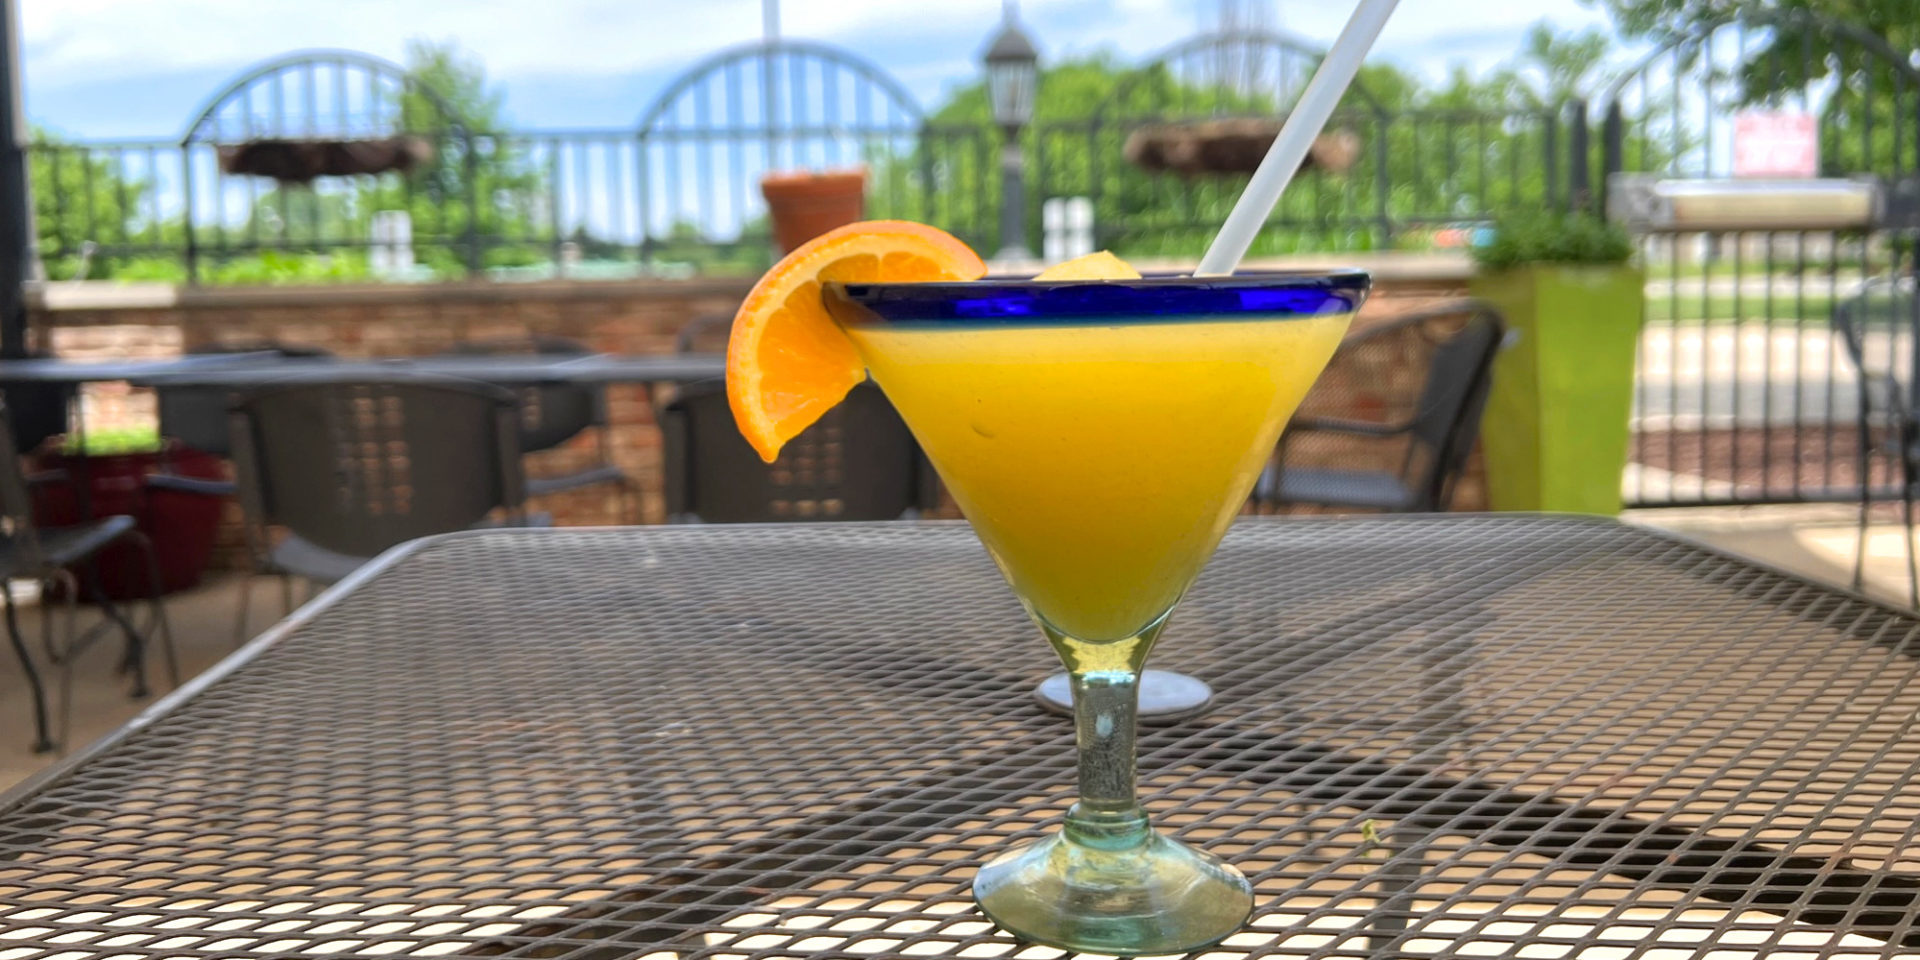 On a patio, there is a pineapple margarita with an orange slice in a martini shaped margarita glass with a blue rim. Photo by Alyssa Buckley